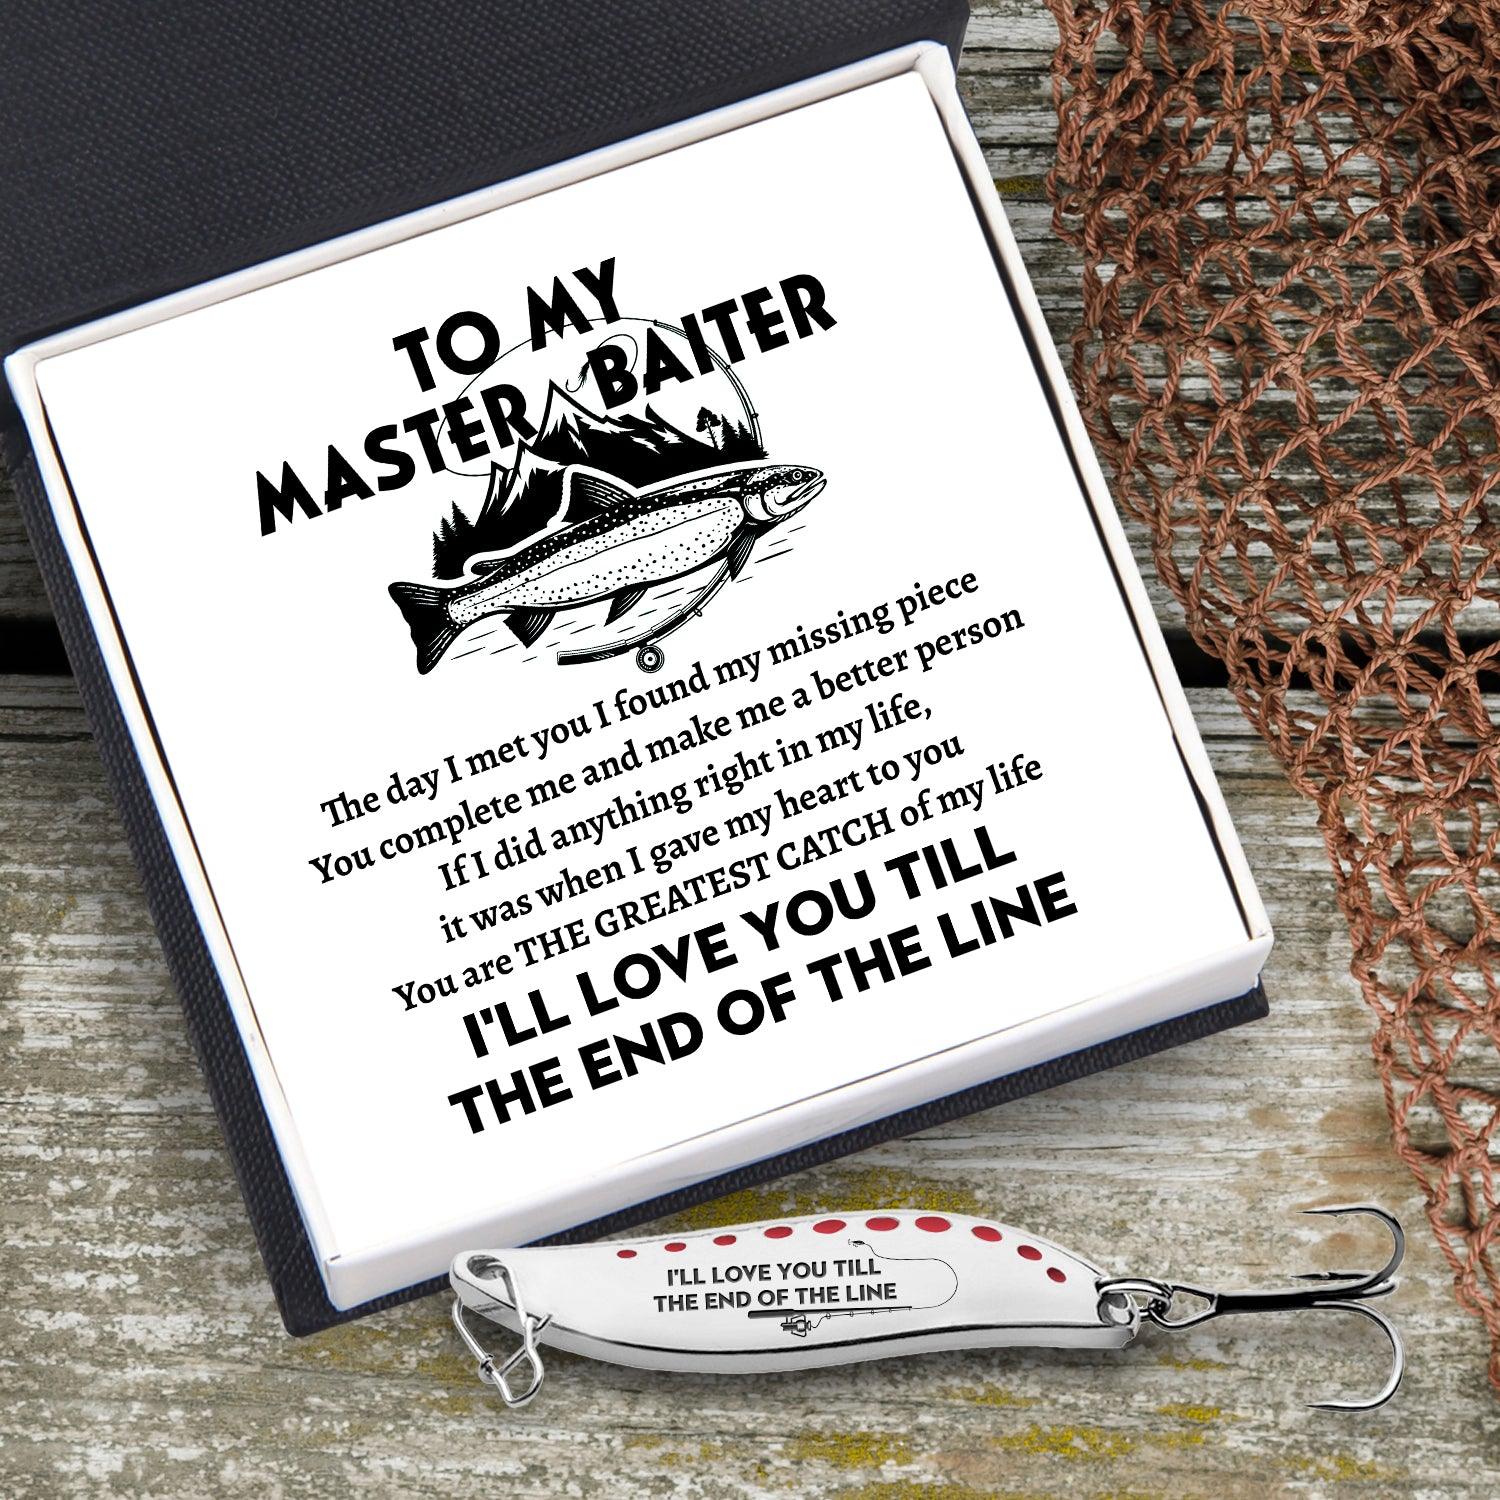 Fishing Lure - Fishing - To My Fisherwoman - You Are The Greatest Catc -  Wrapsify